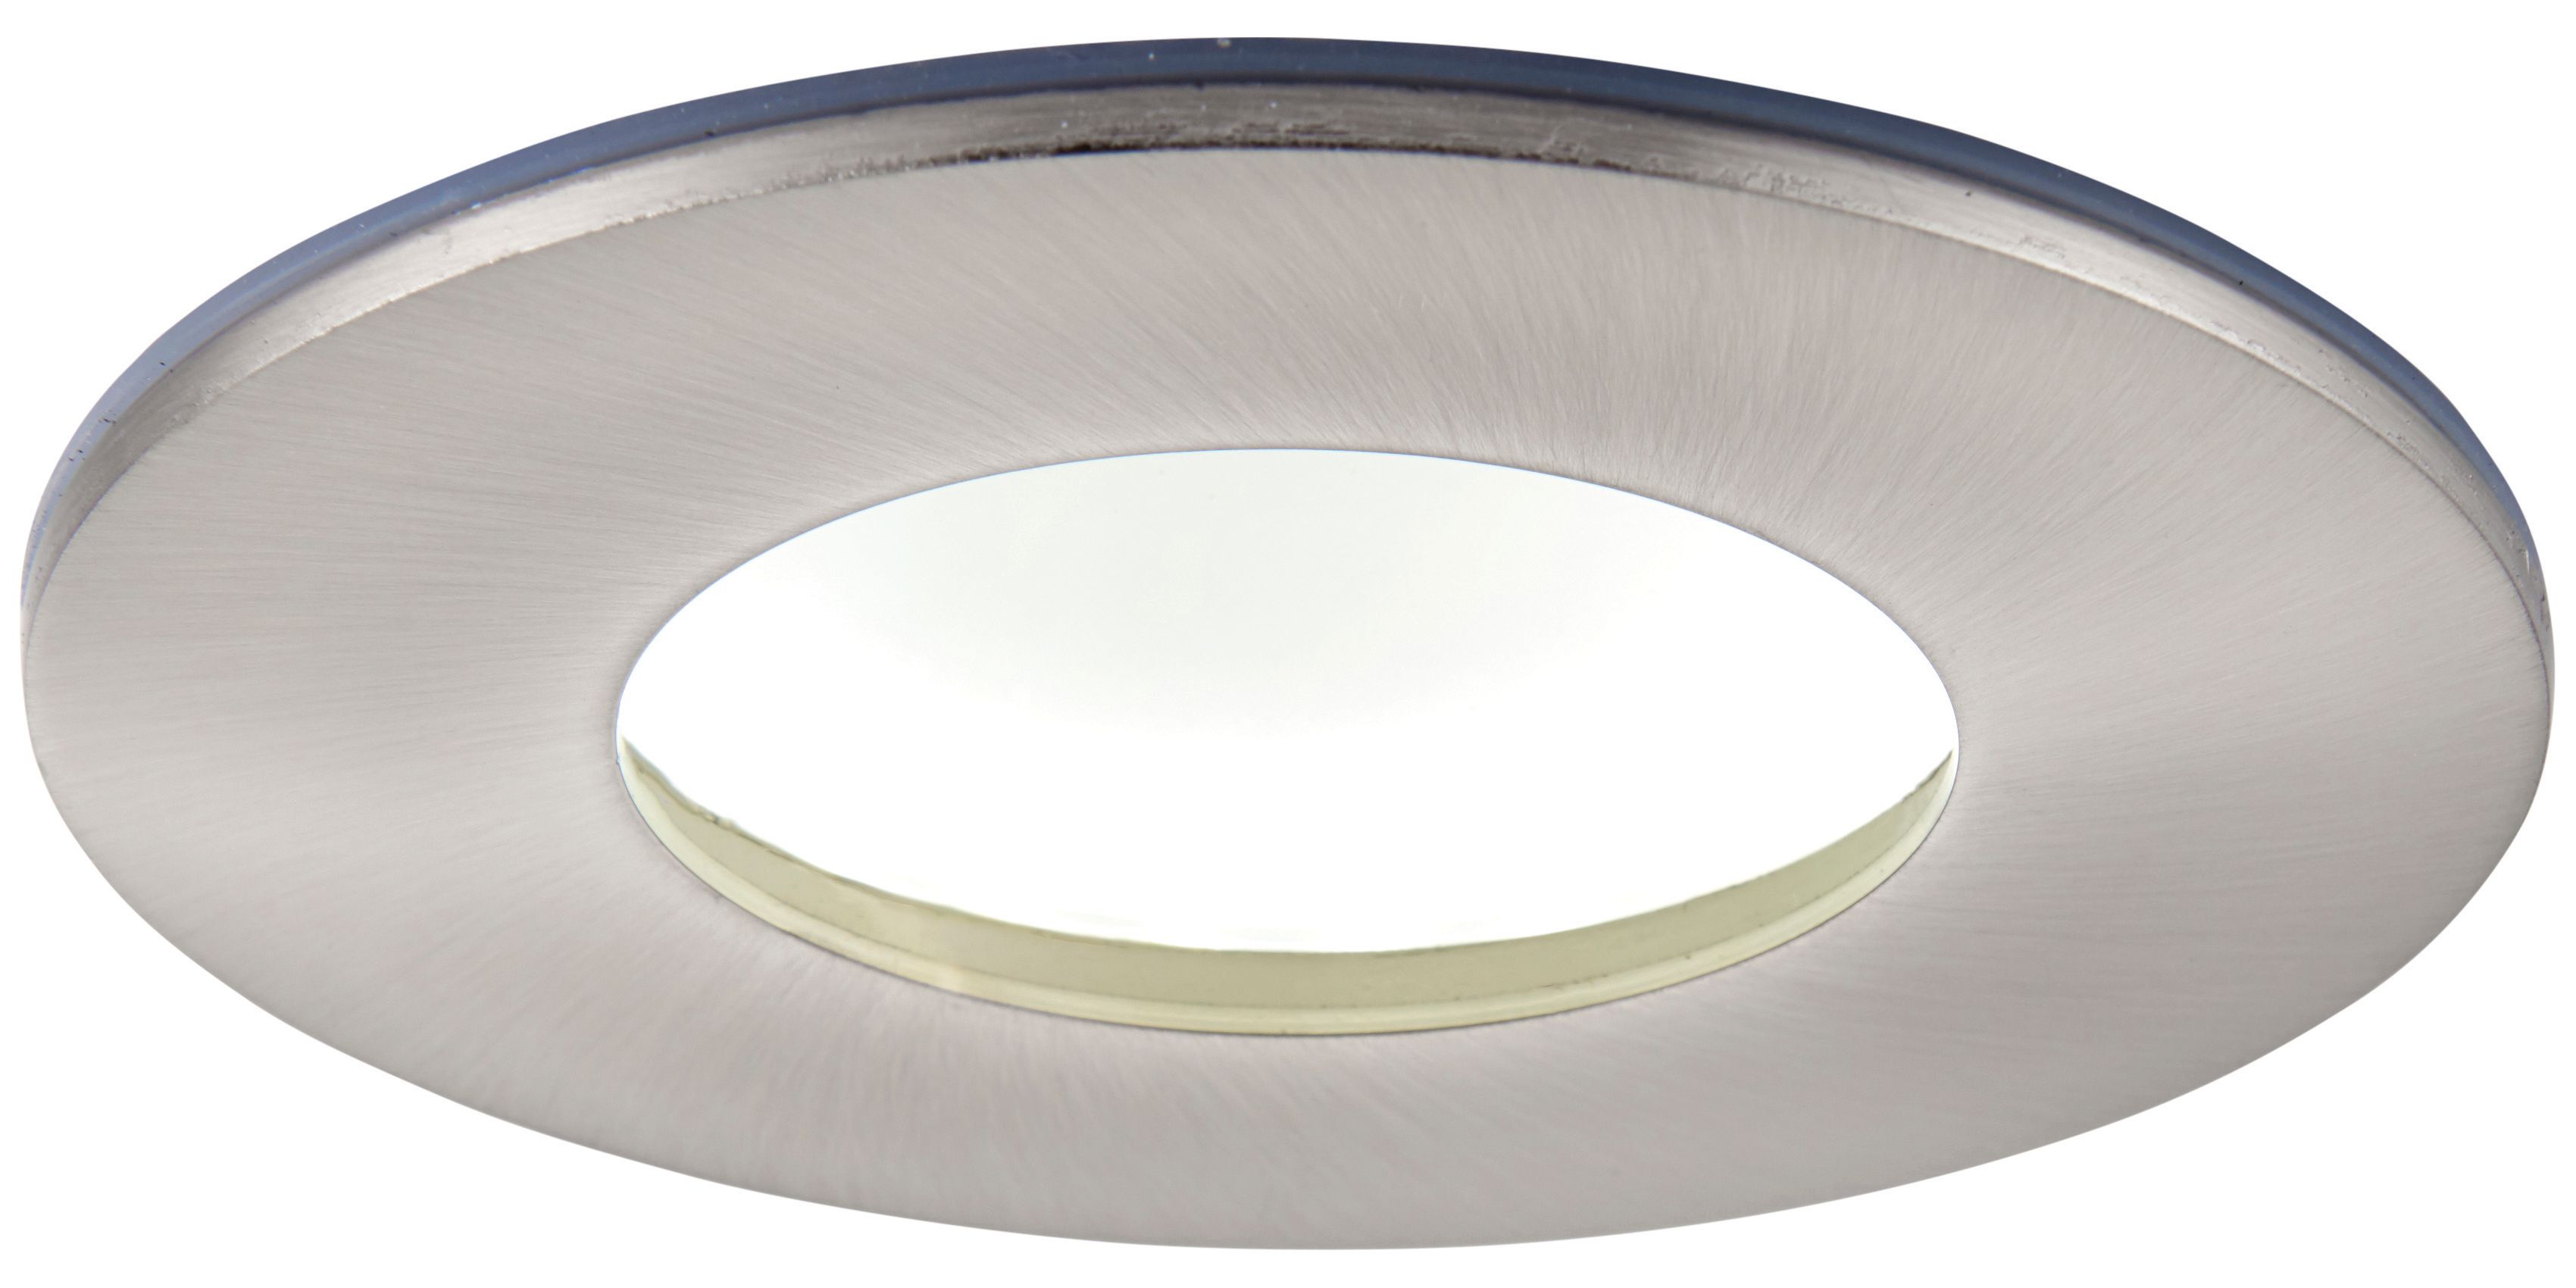 Saxby Orbital Plus LED Anti Glare Fire Rated IP65 Cool White Dimmable Downlight 9W - Brushed Nickel